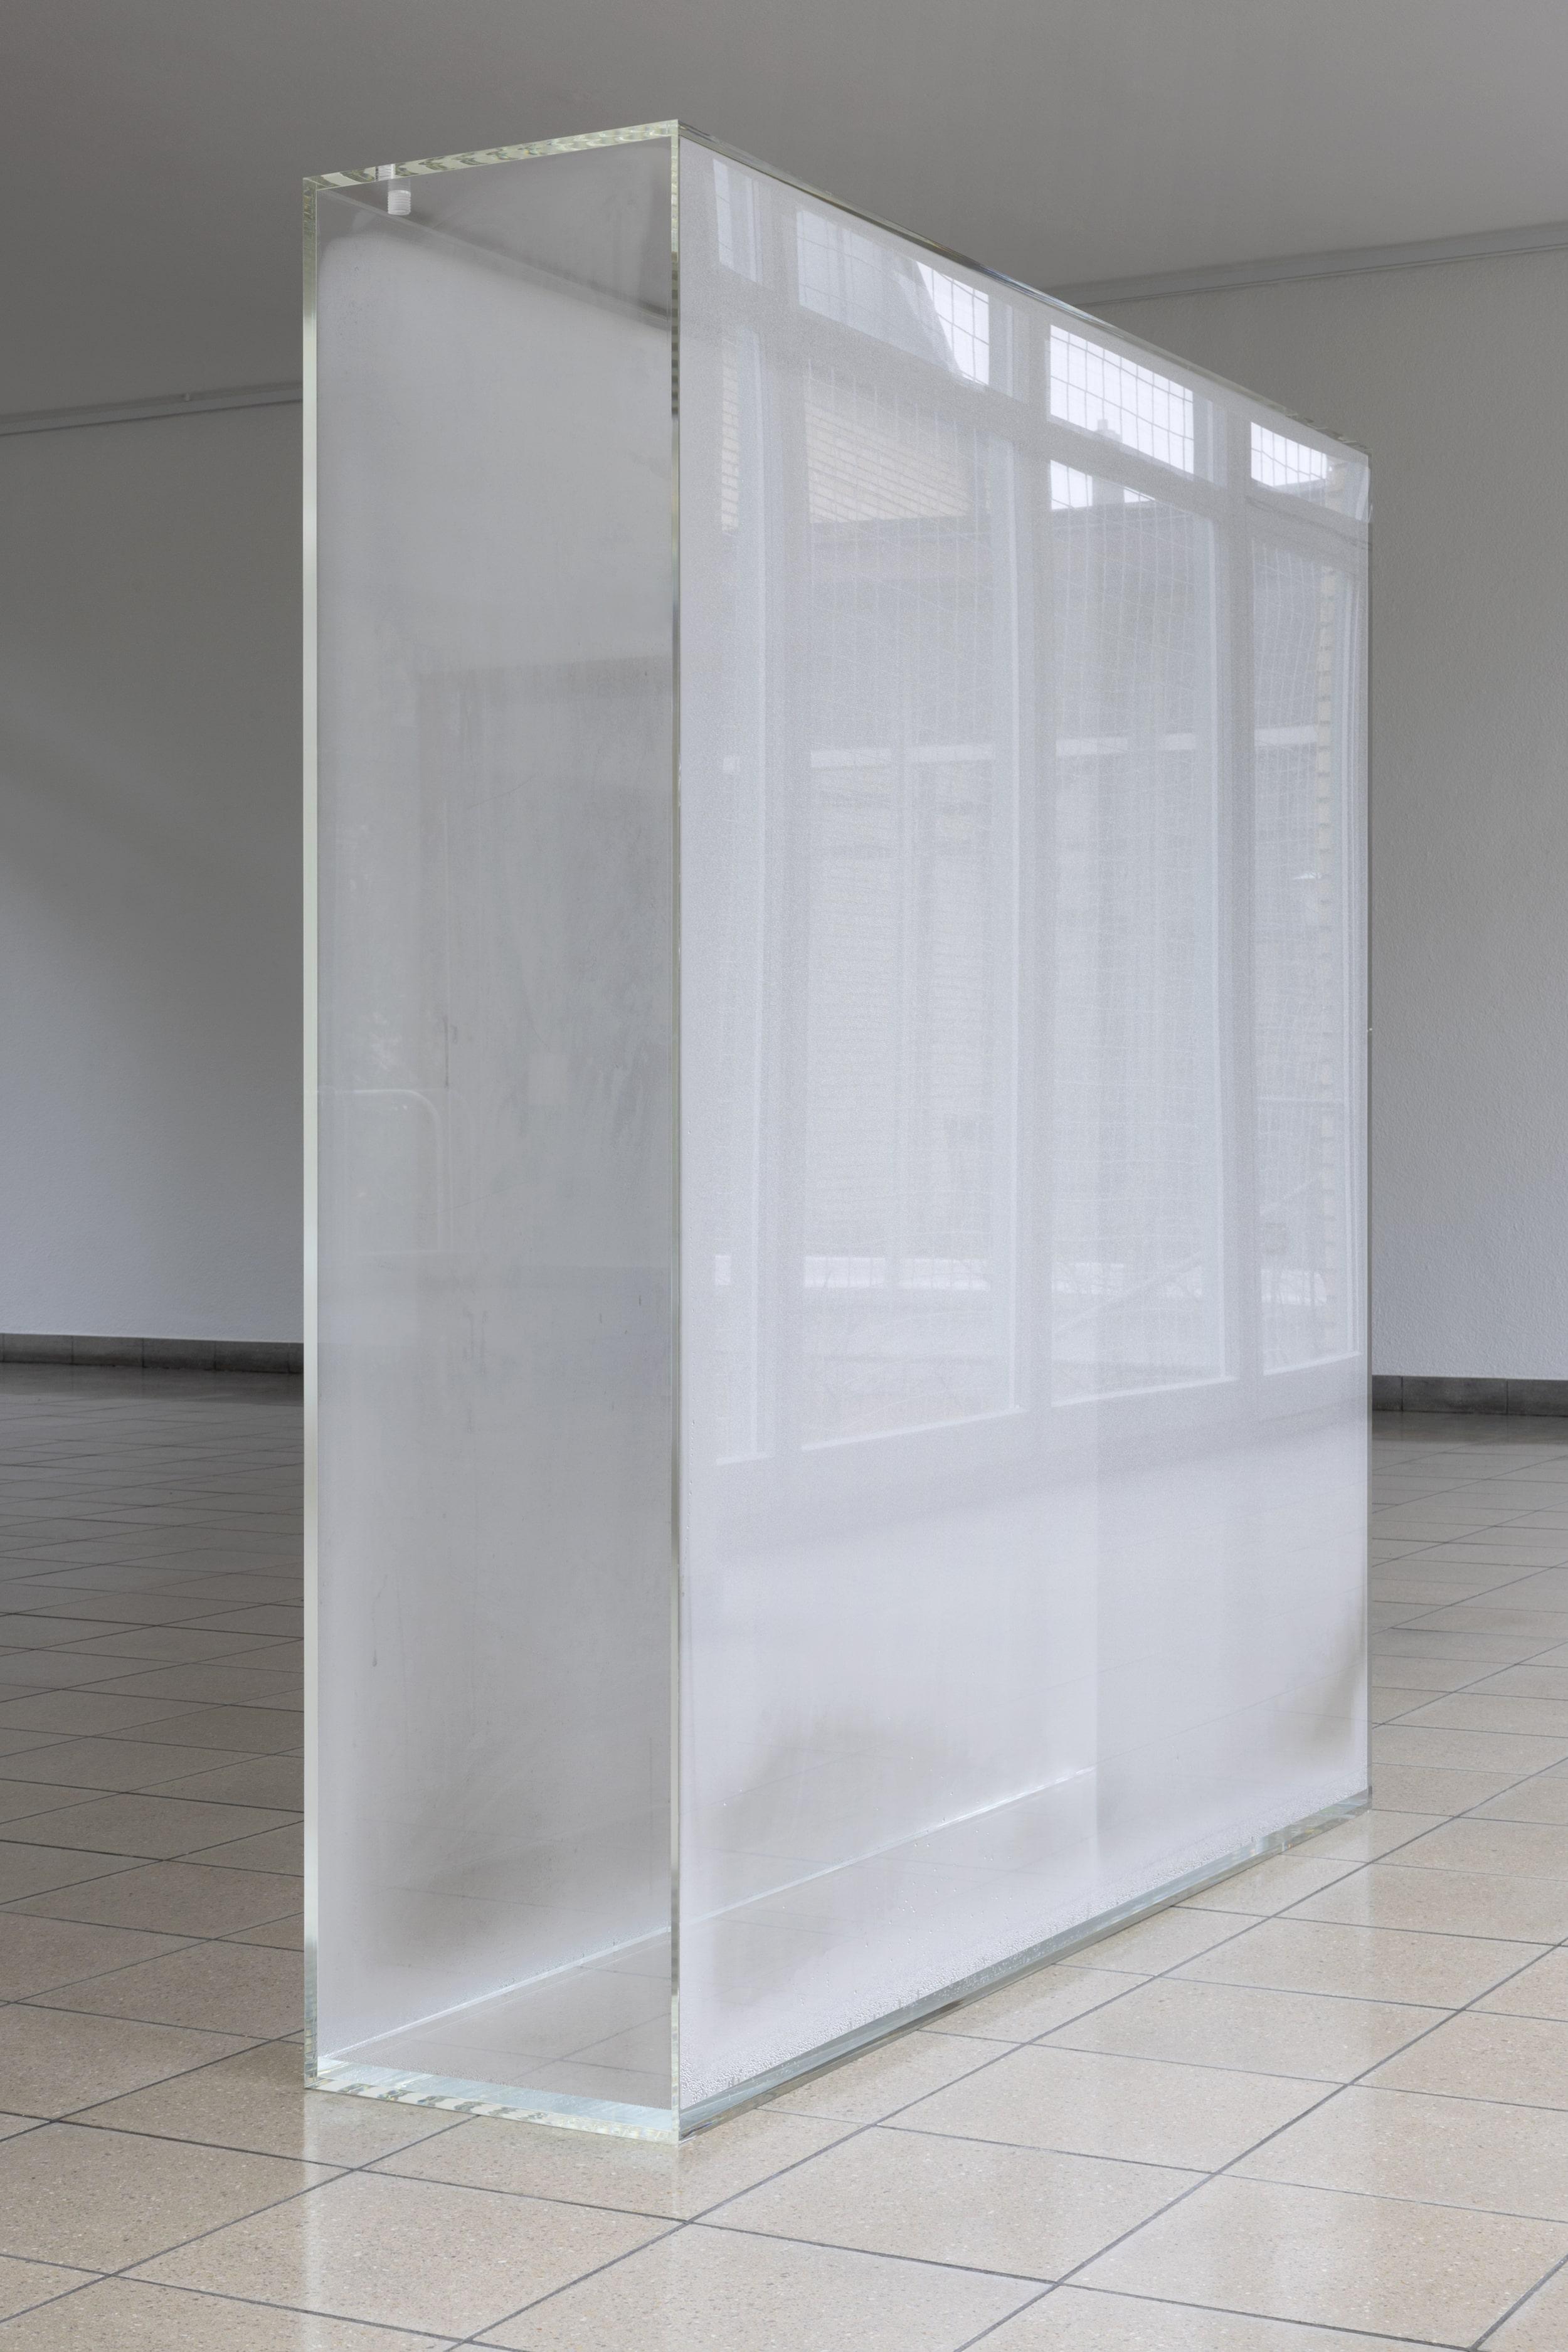 Megan Francis Sullivan, "Study of Condensation Wall, Hans Haacke, 1963–66 and 2013, Collection Museum Ludwig, Cologne", 2024. Megan Francis Sullivan, "Wolkenstudie", installation view, Kunsthaus Glarus, 2024